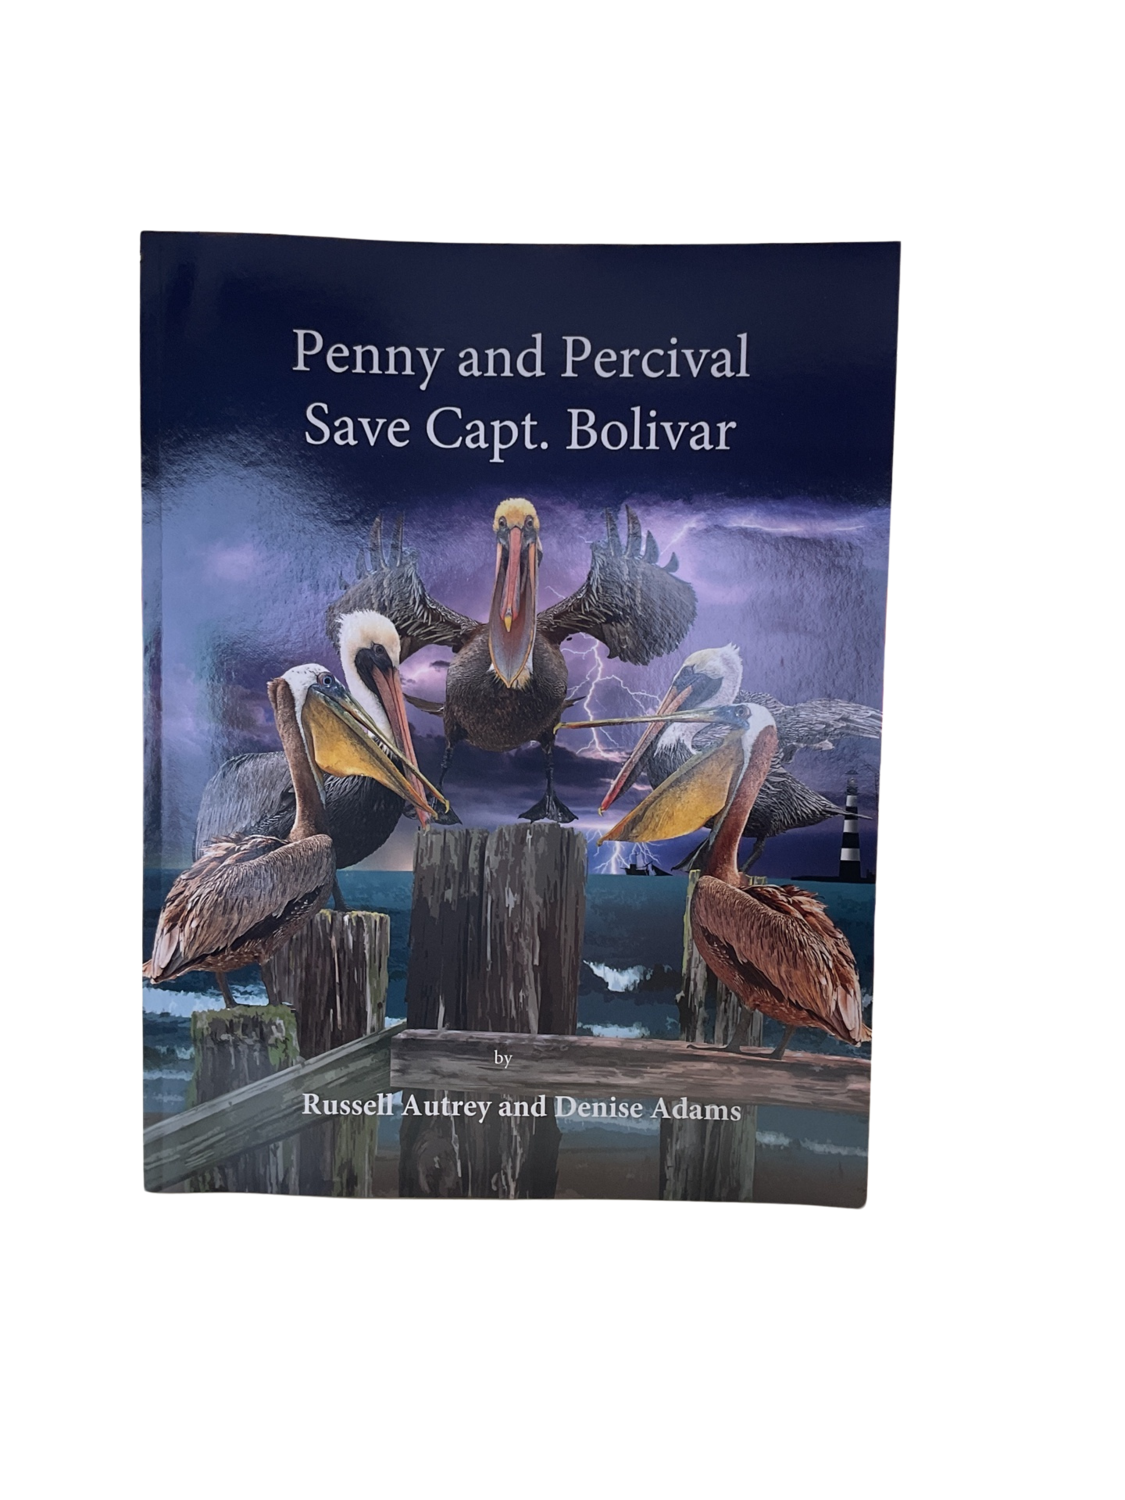 Penny and Percival Save Capt. Bolivar